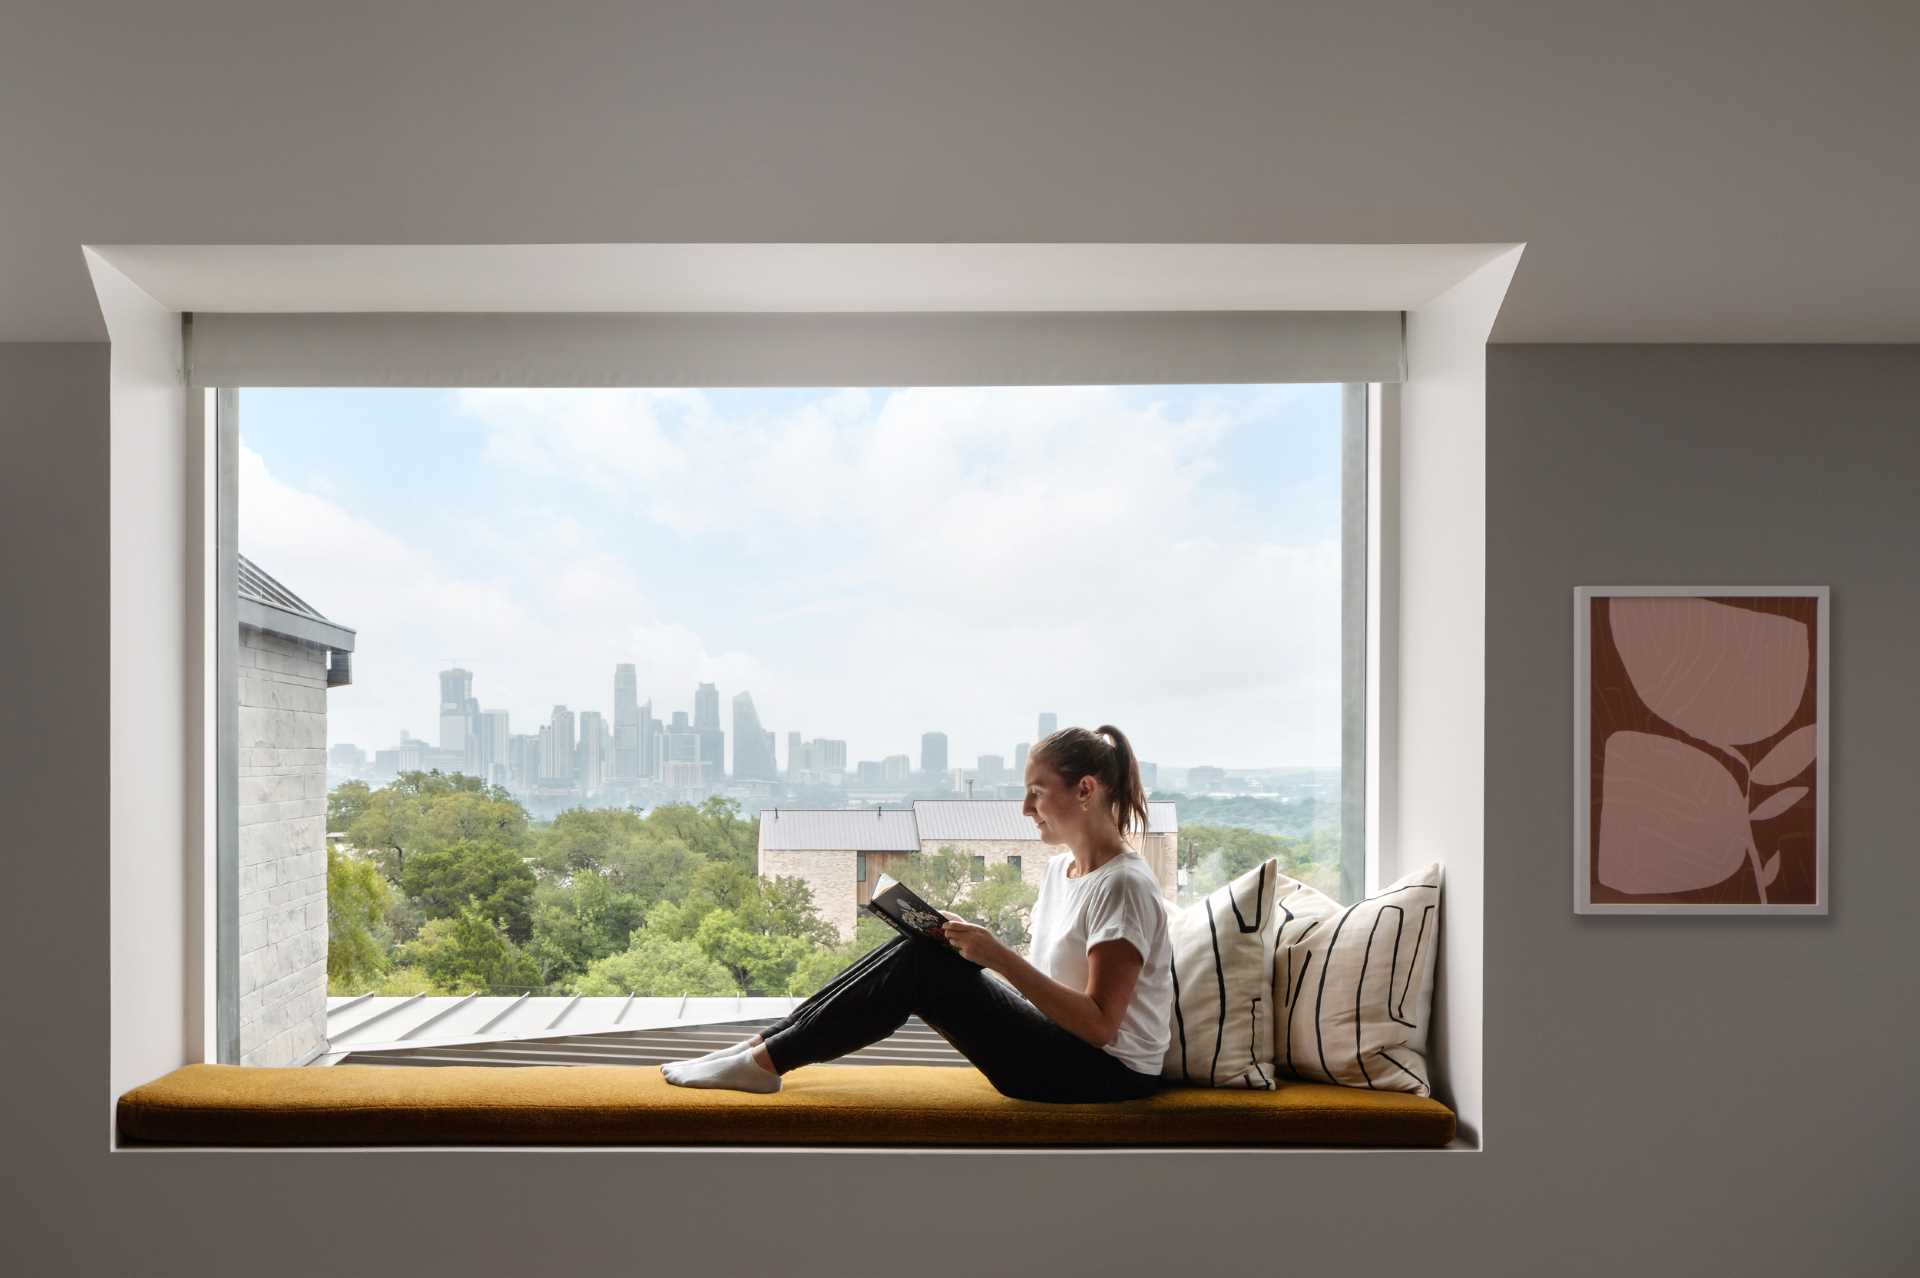 In another bedroom, a graphic wallpaper draws attention, while a window seat provides a view of the city skyline.